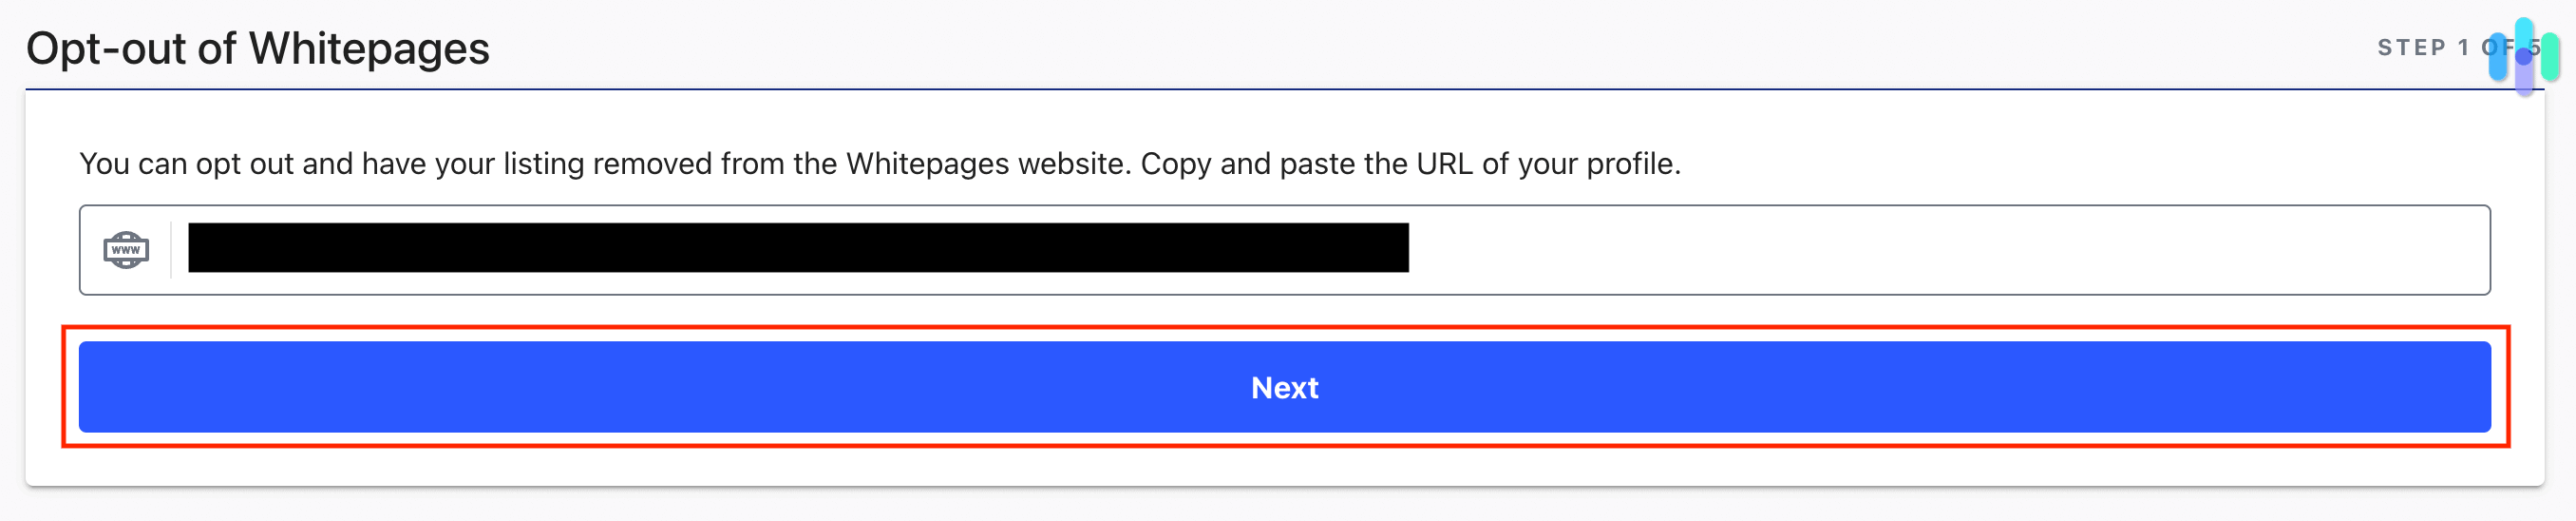 Whitepages opt out form